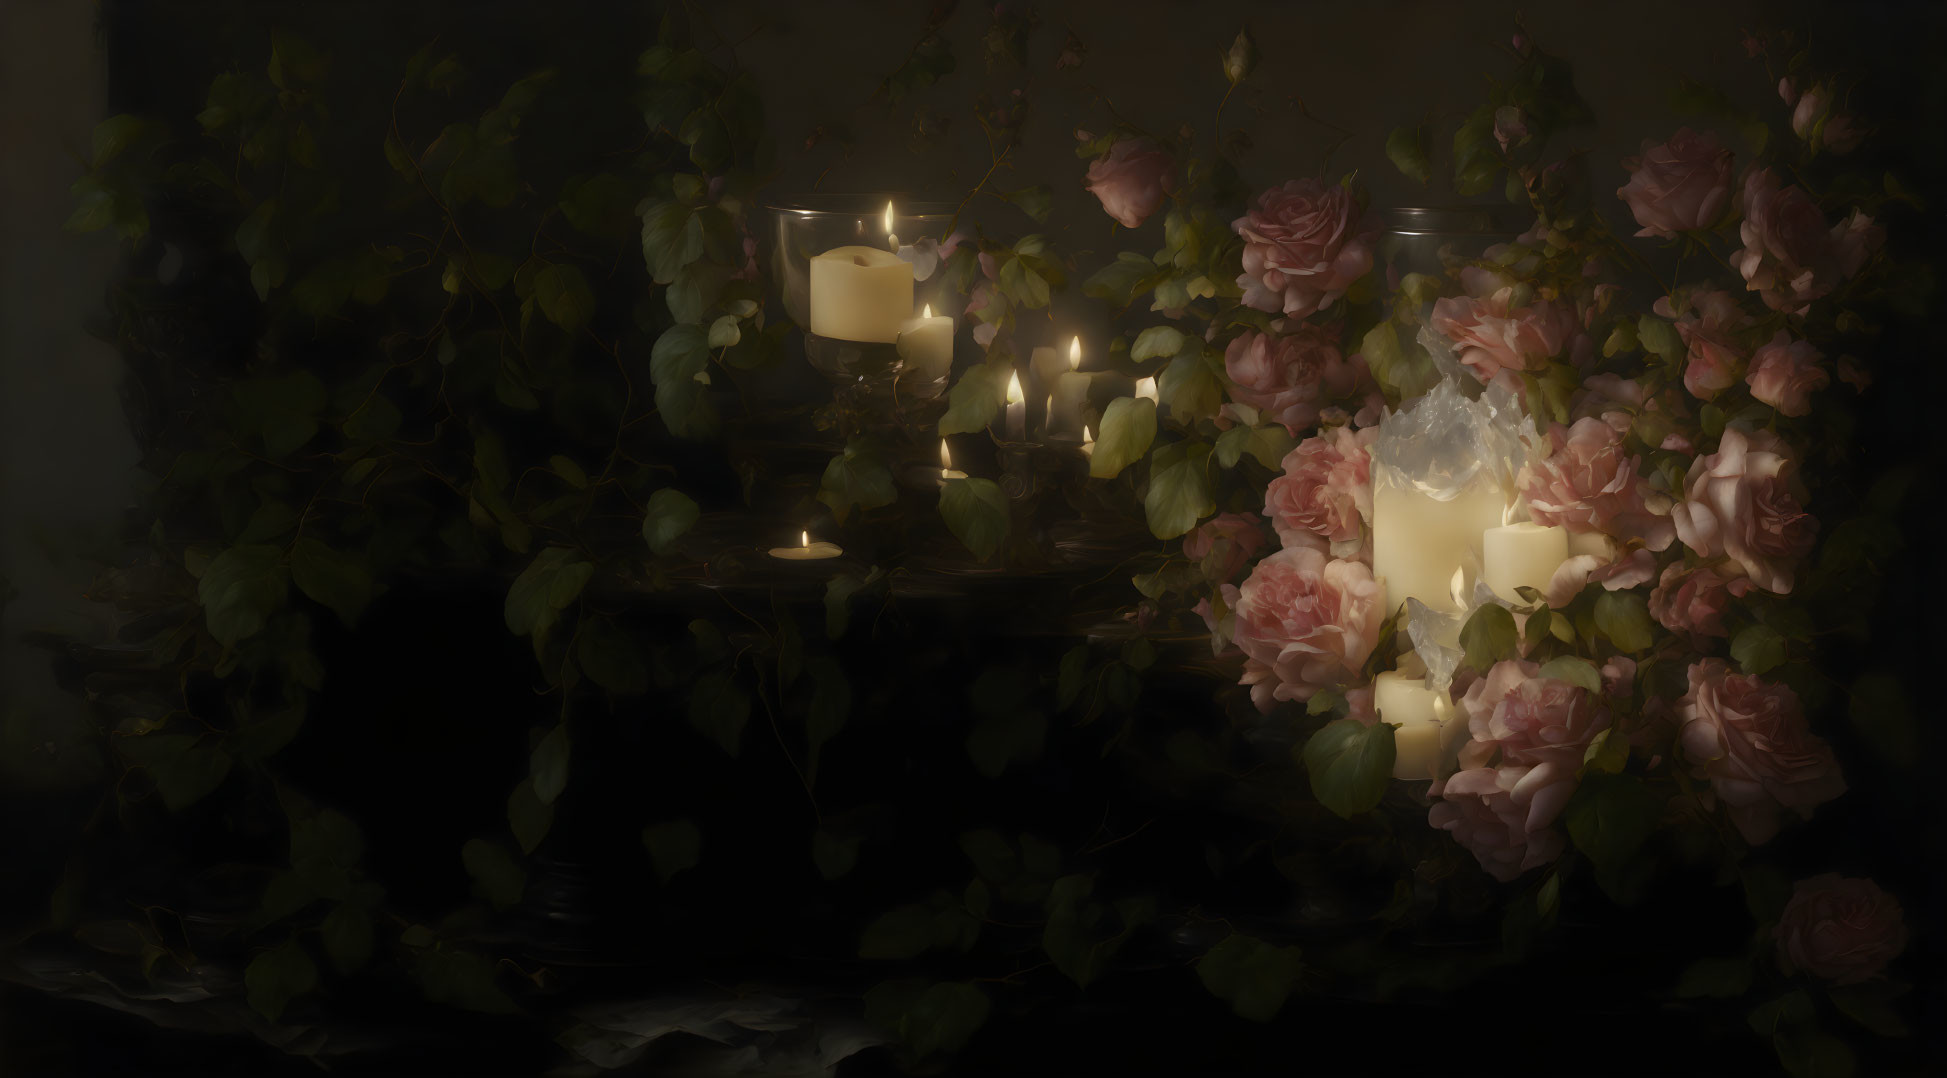 Tranquil still life with candles, pink roses, and green foliage